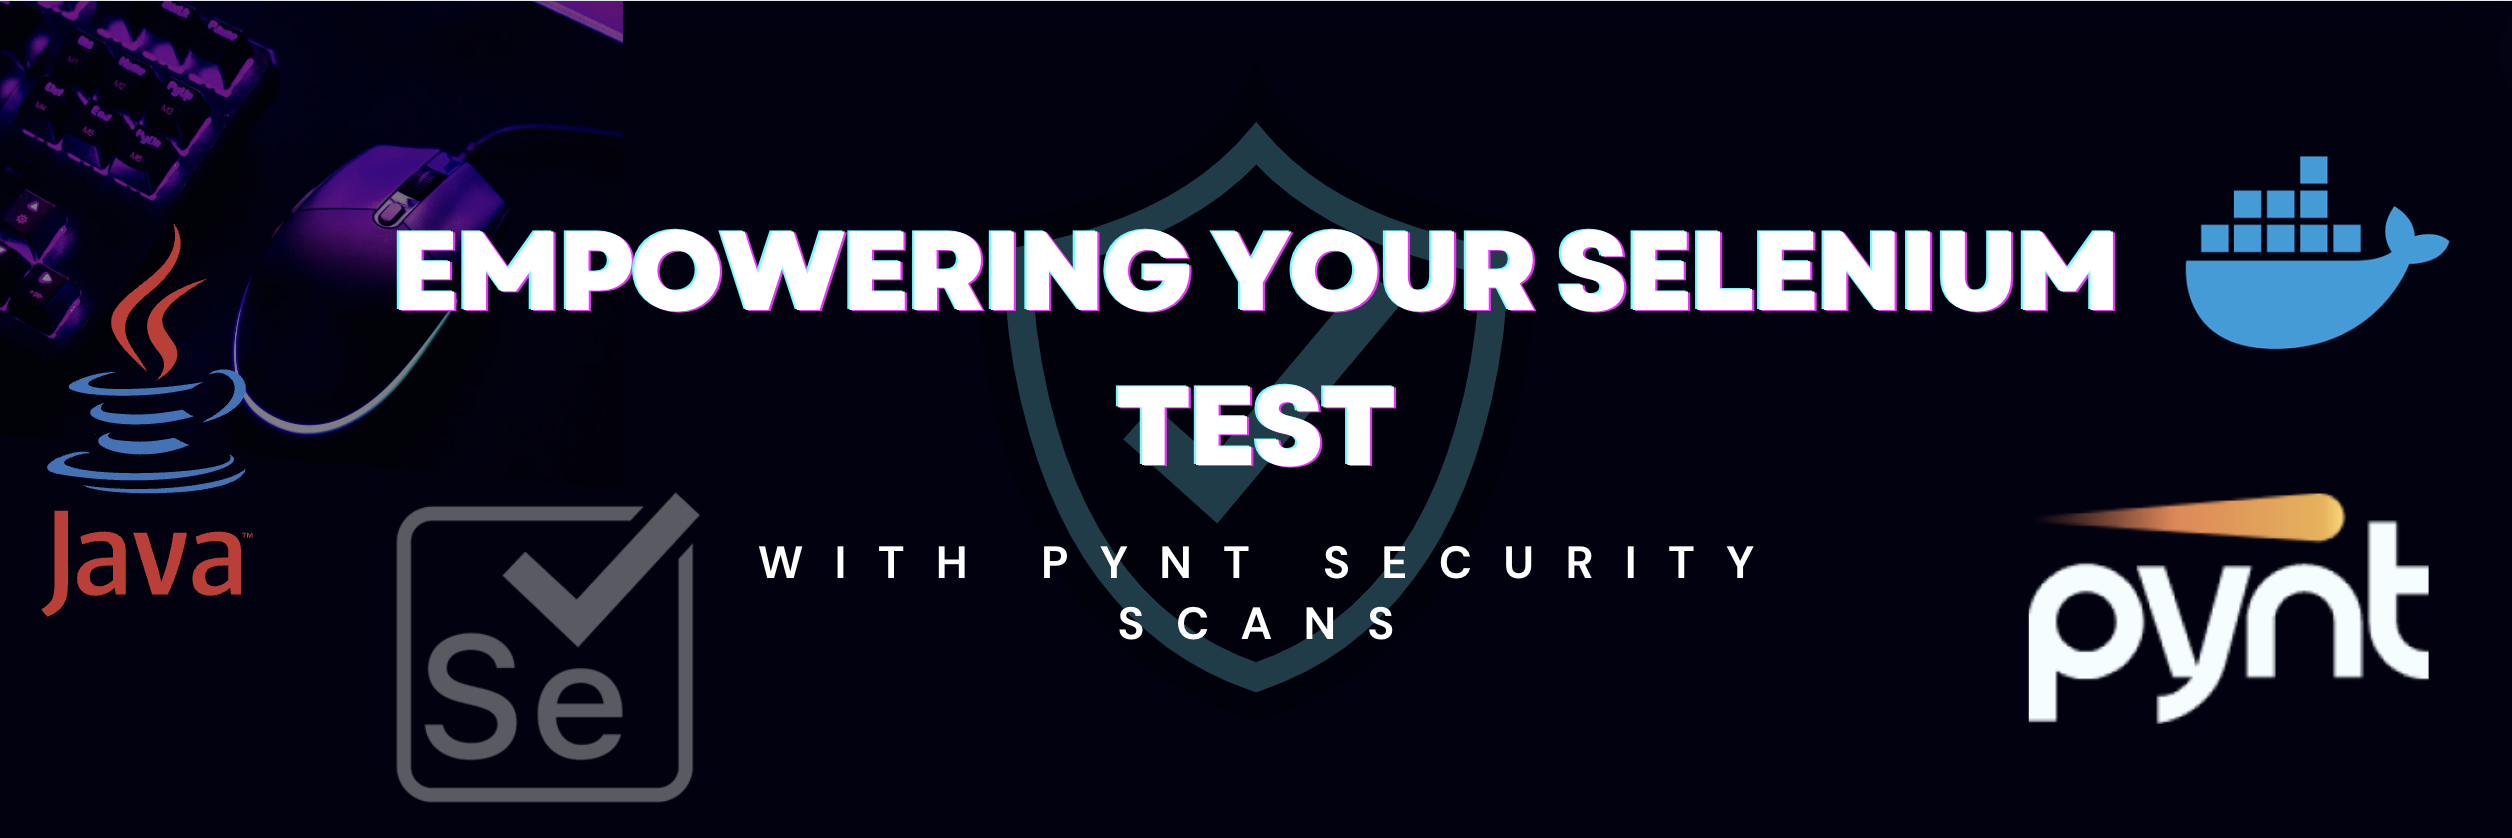 Integrate selenium tests with pynt security scans